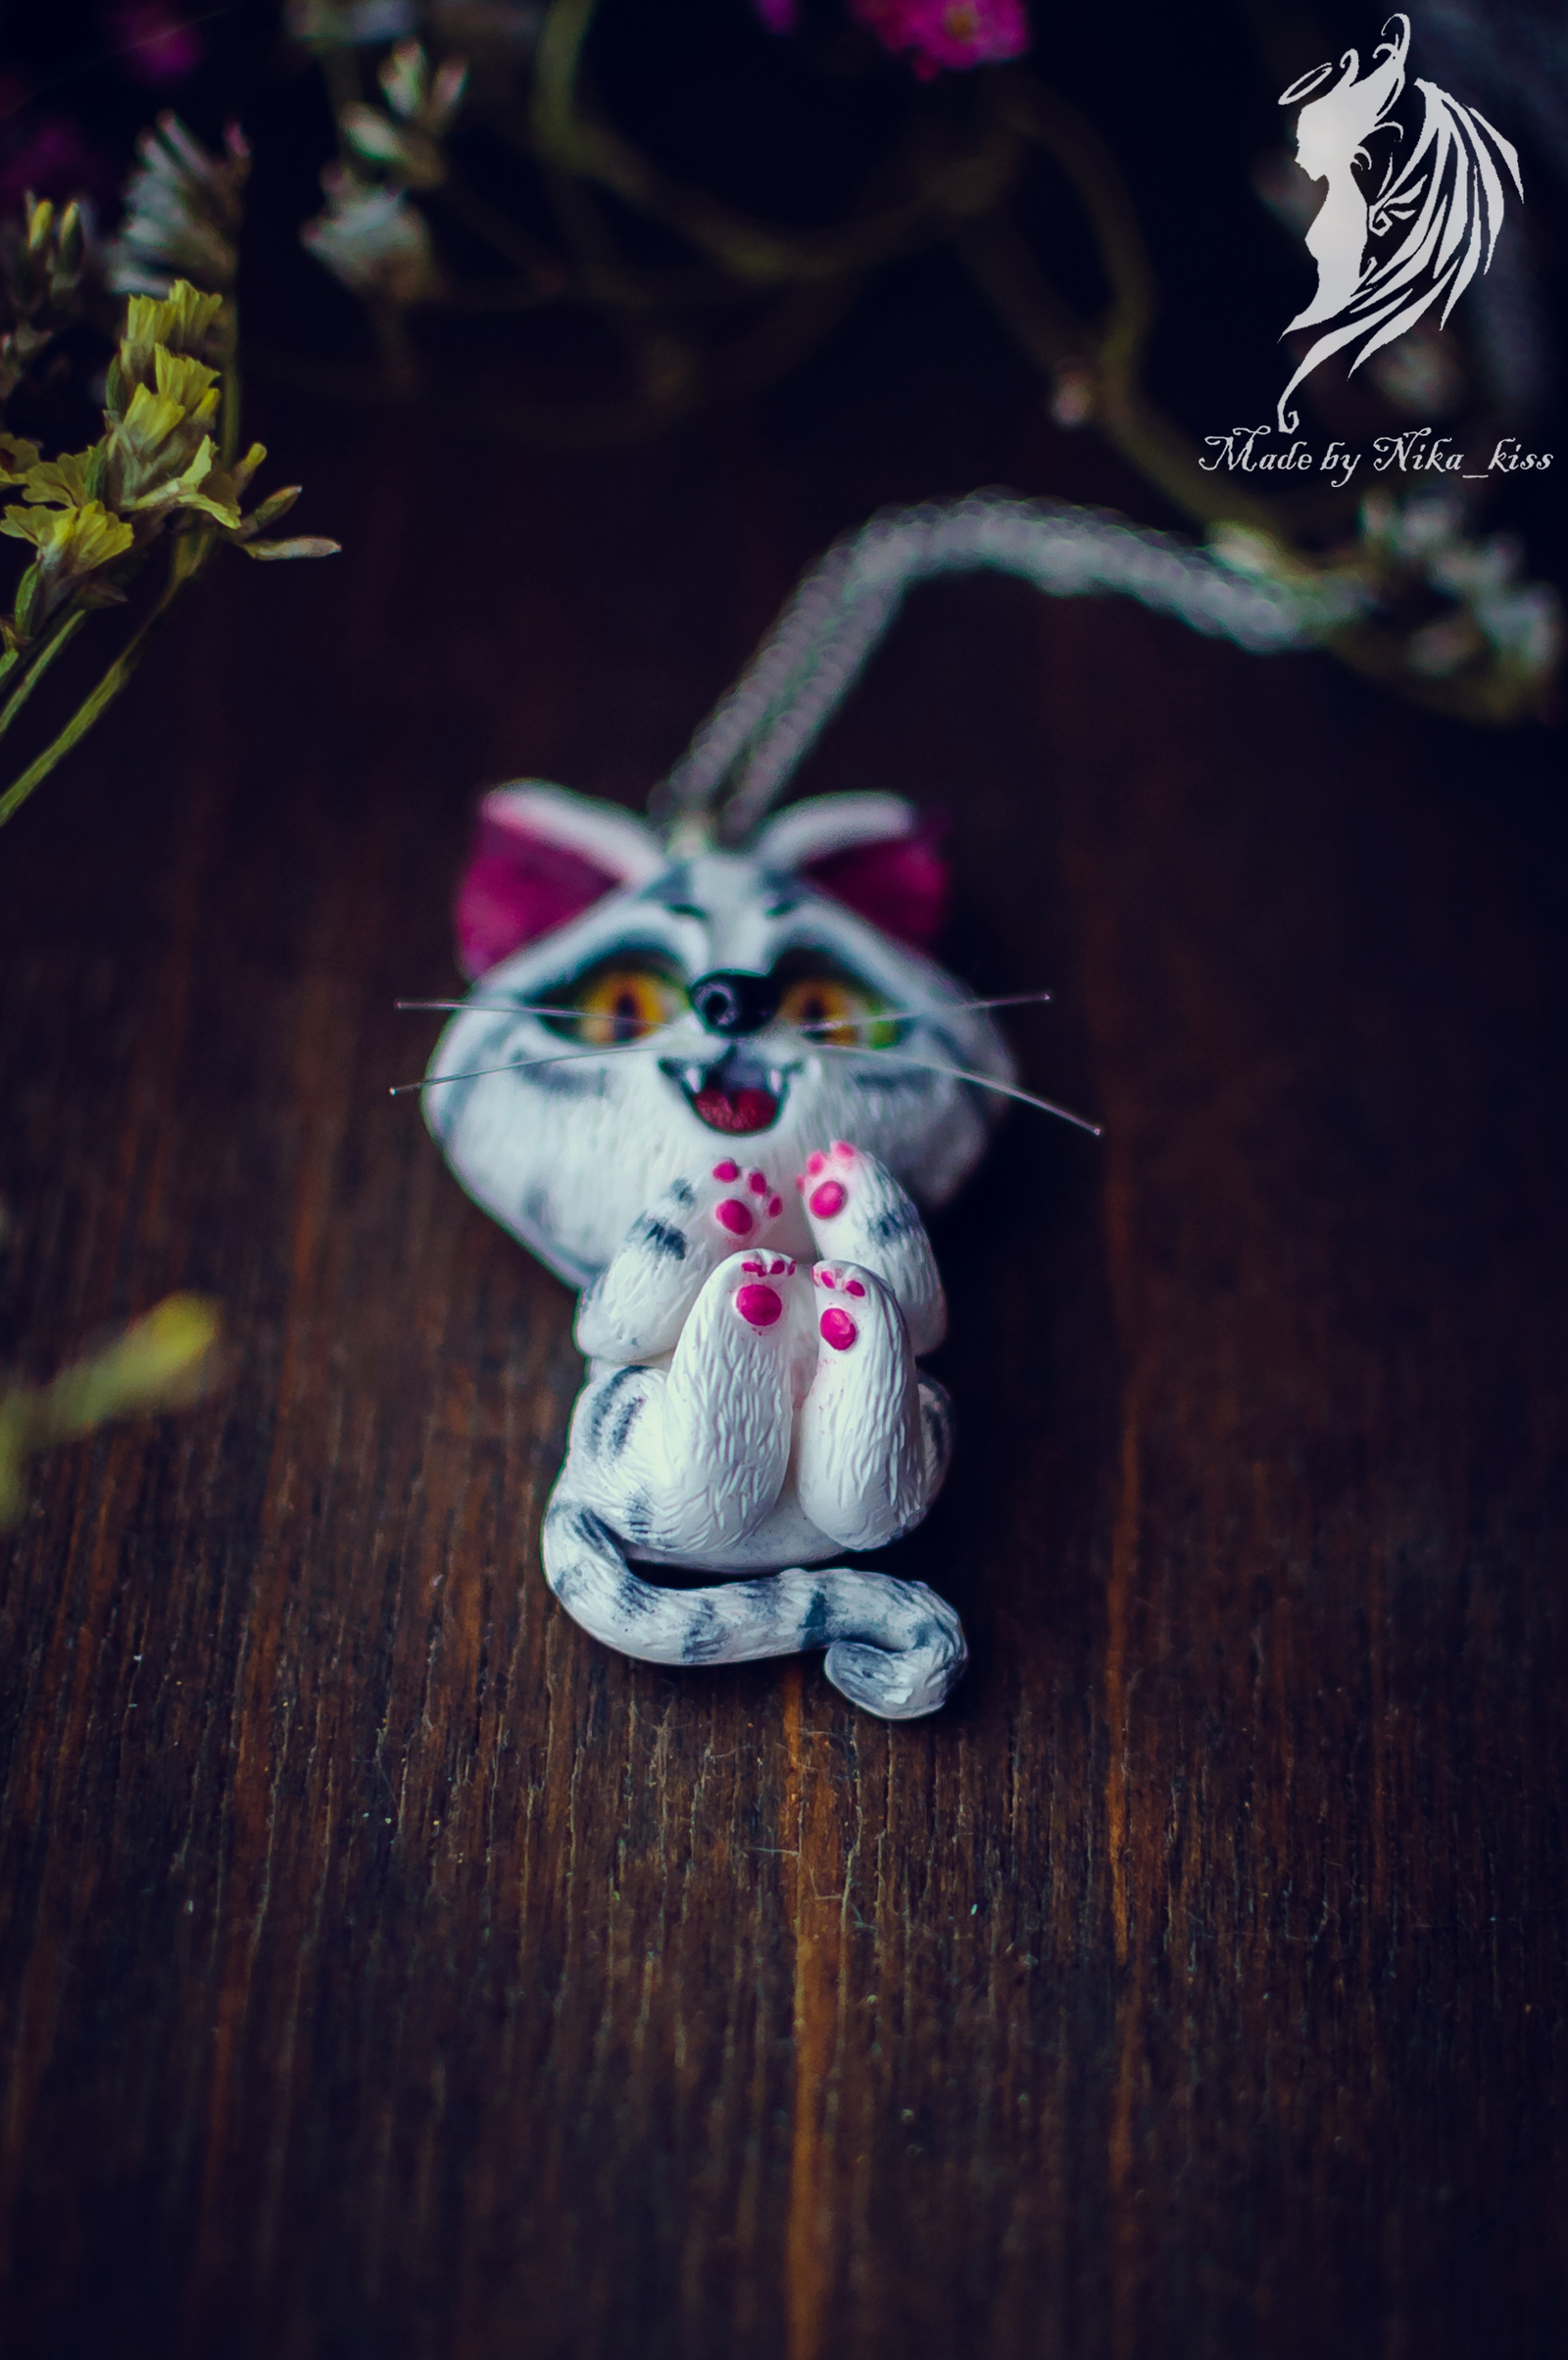 Mustachioed-striped cat made of polymer clay. - Longpost, Paws, Nika_kiss, cat, Handmade, Polymer clay, Needlework without process, My